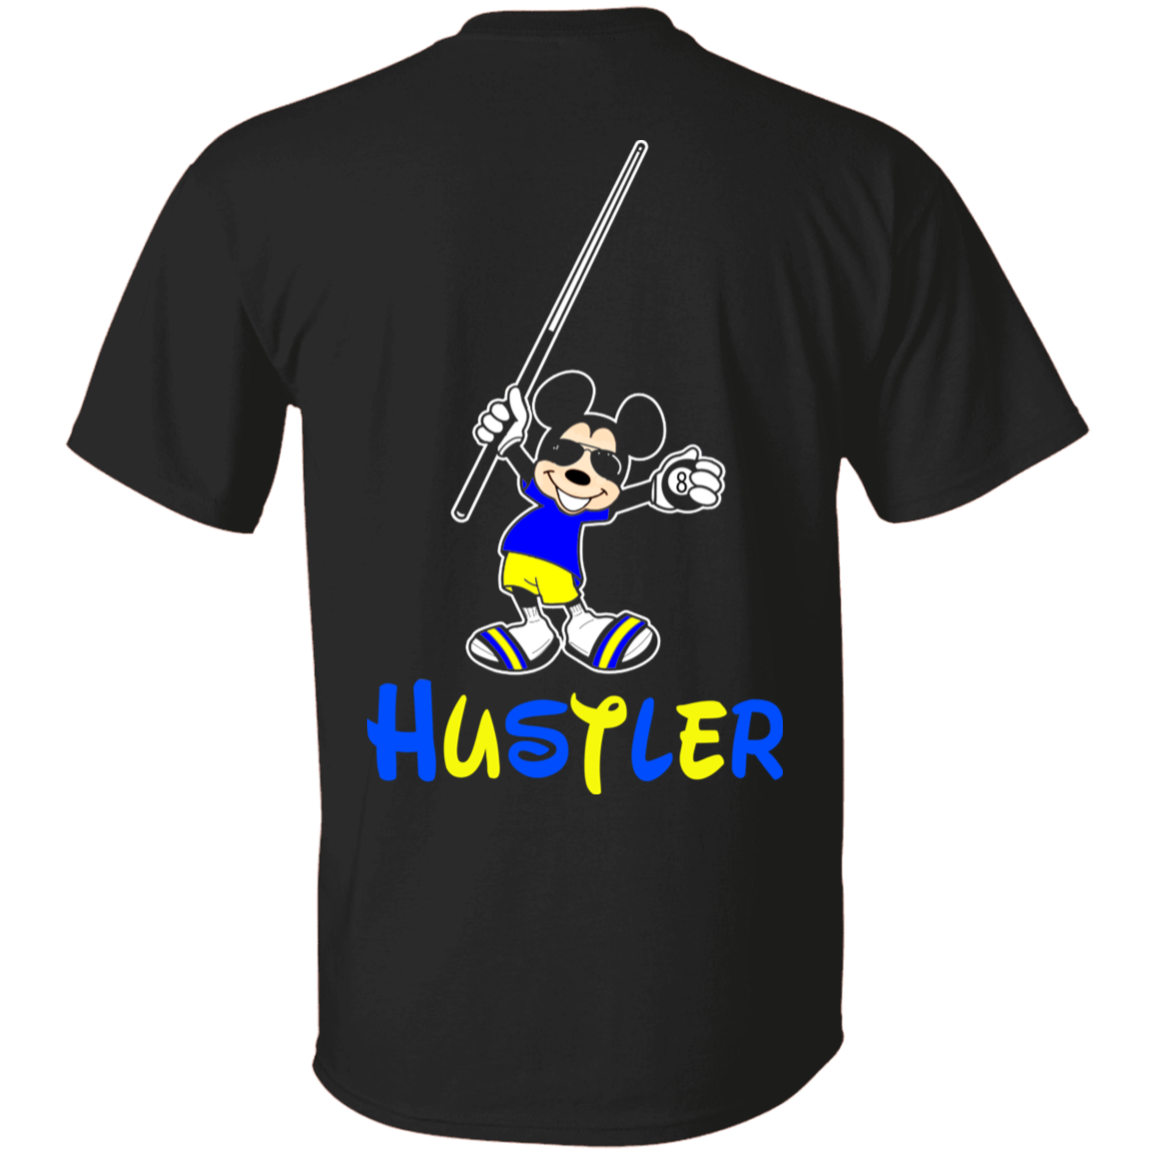 The GHOATS Custom Design #20. Look at the back. Hustle Mouse. Mickey Mouse Fan Art. Basic 100% Cotton T-Shirt